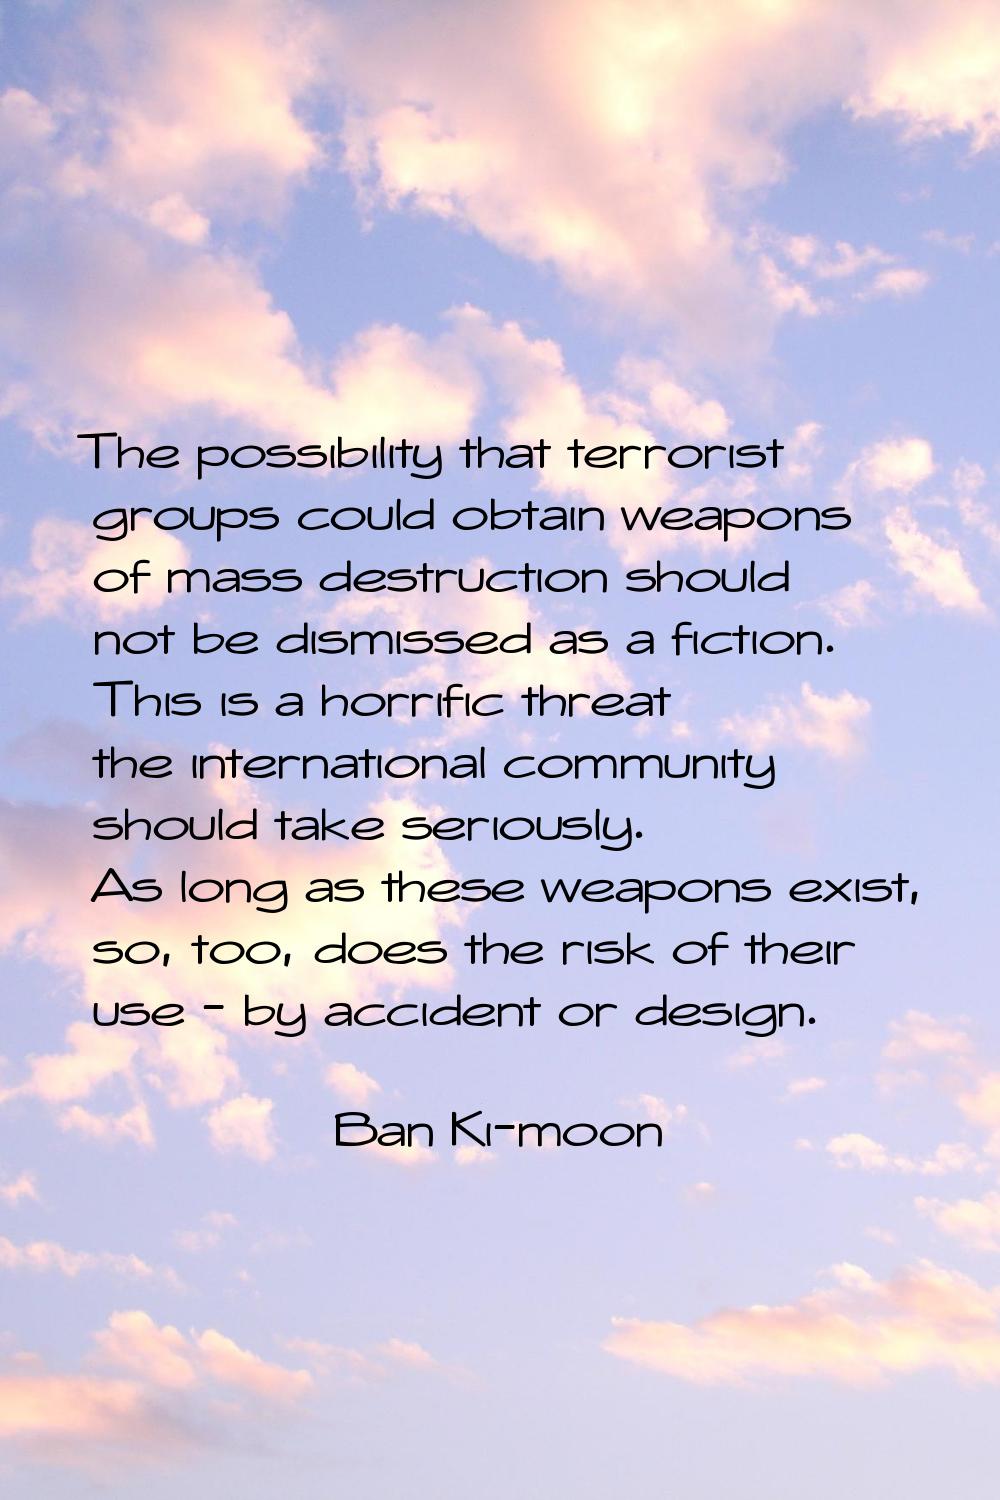 The possibility that terrorist groups could obtain weapons of mass destruction should not be dismis